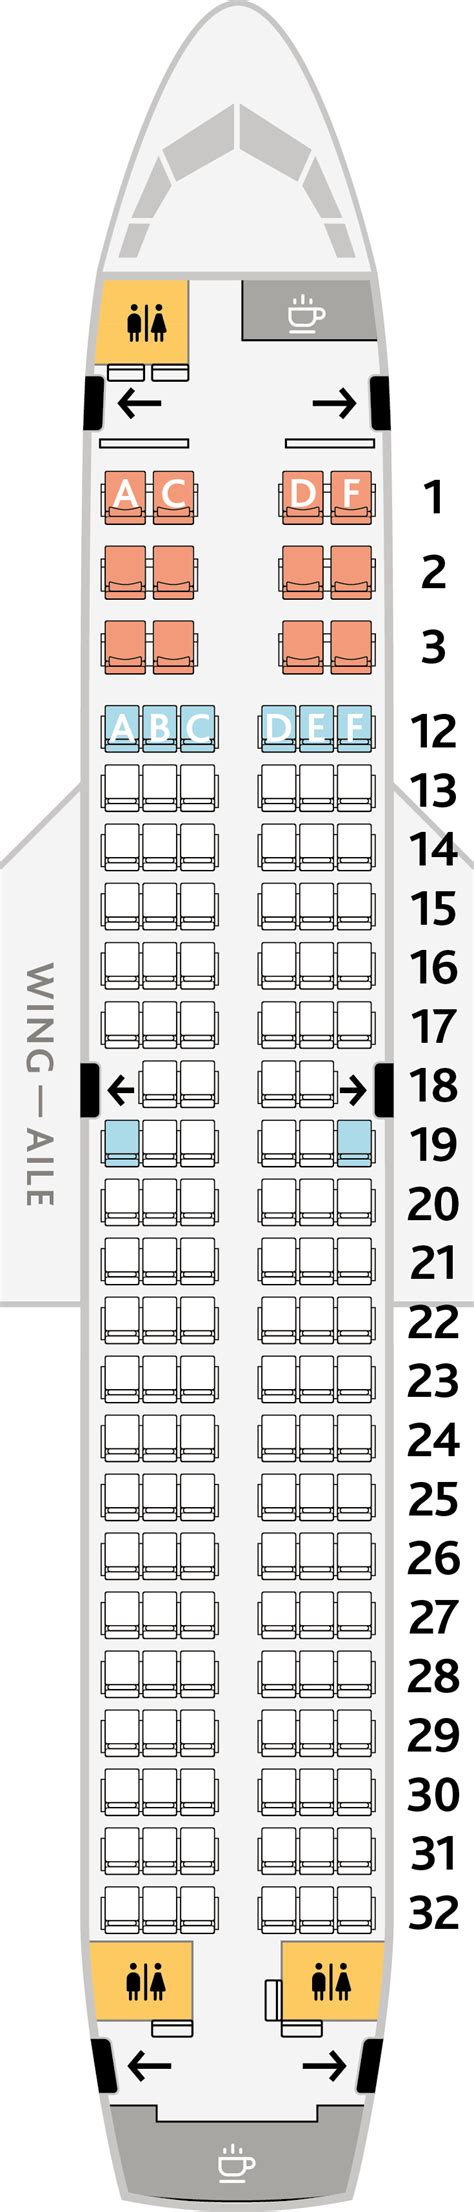 air canada airlines seat selection